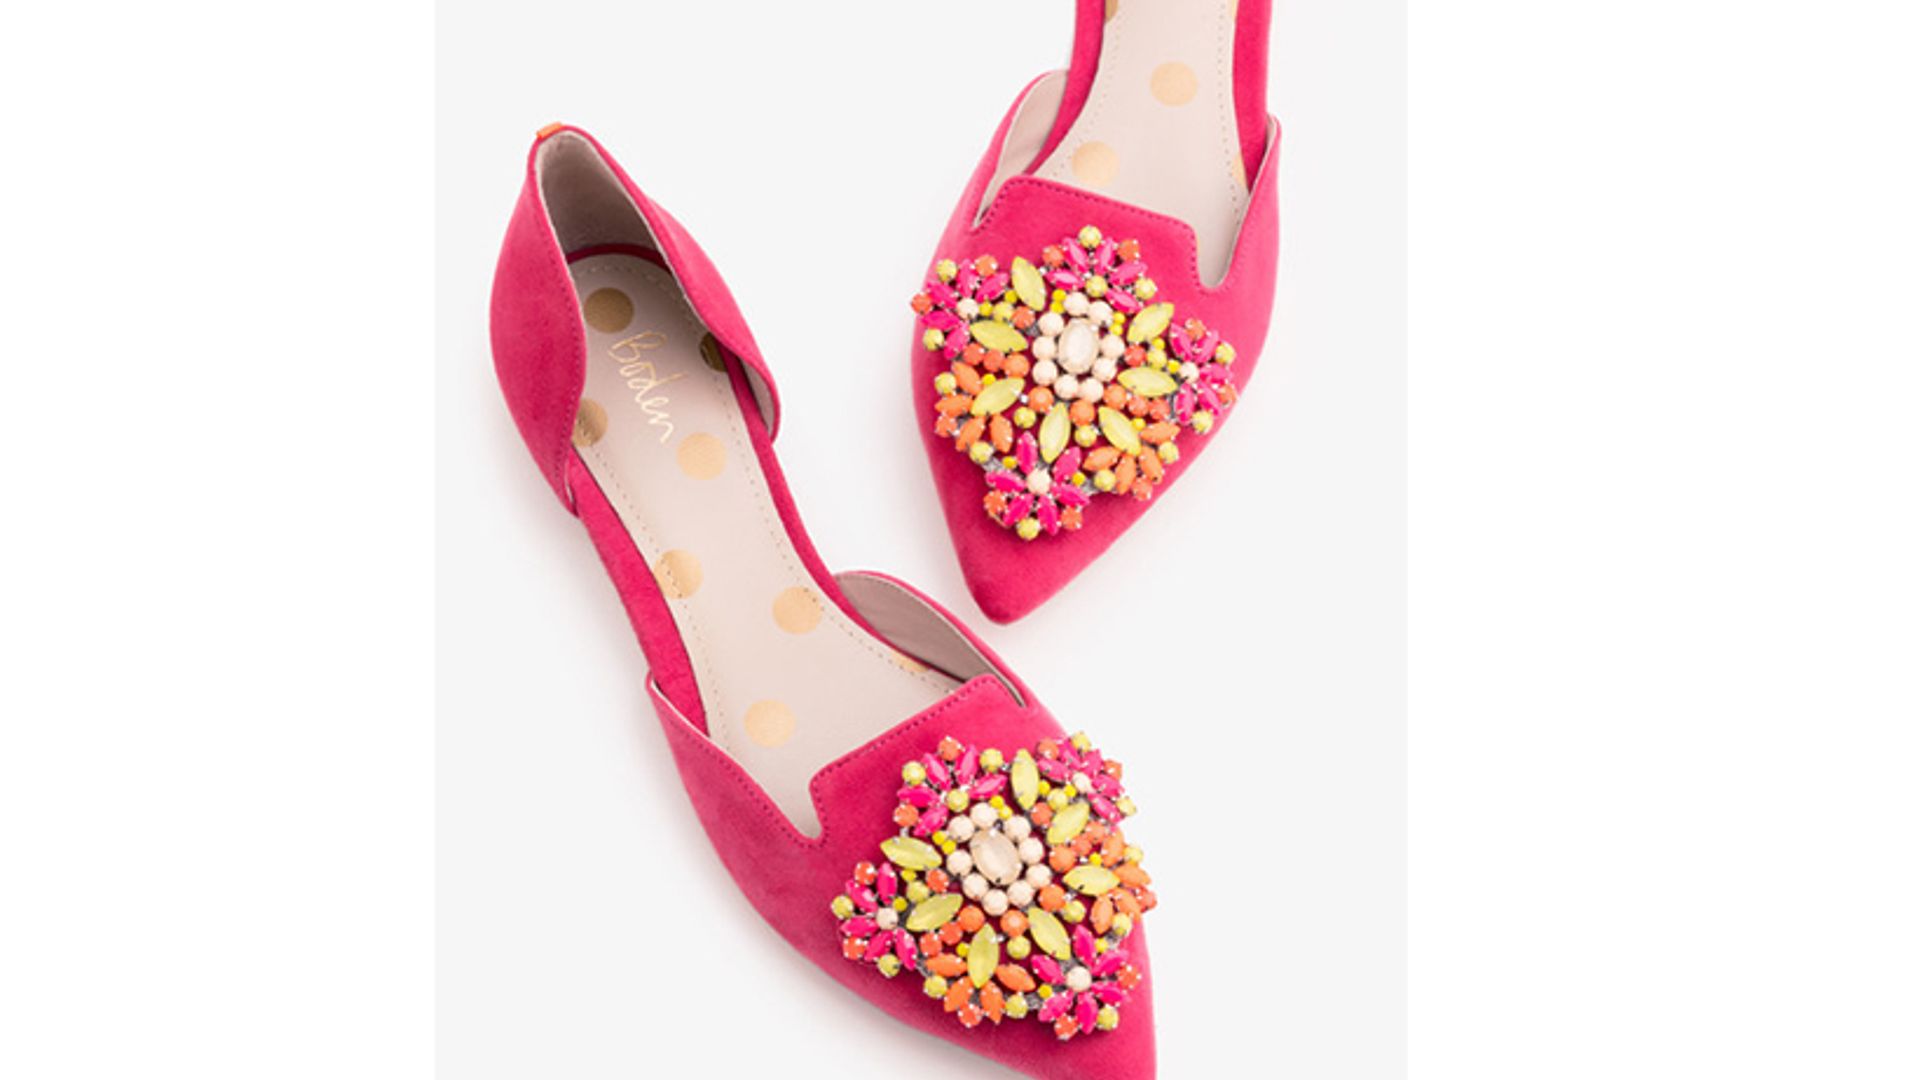 HFM's Tuesday Shoesday! Boden's jewelled Leah flats